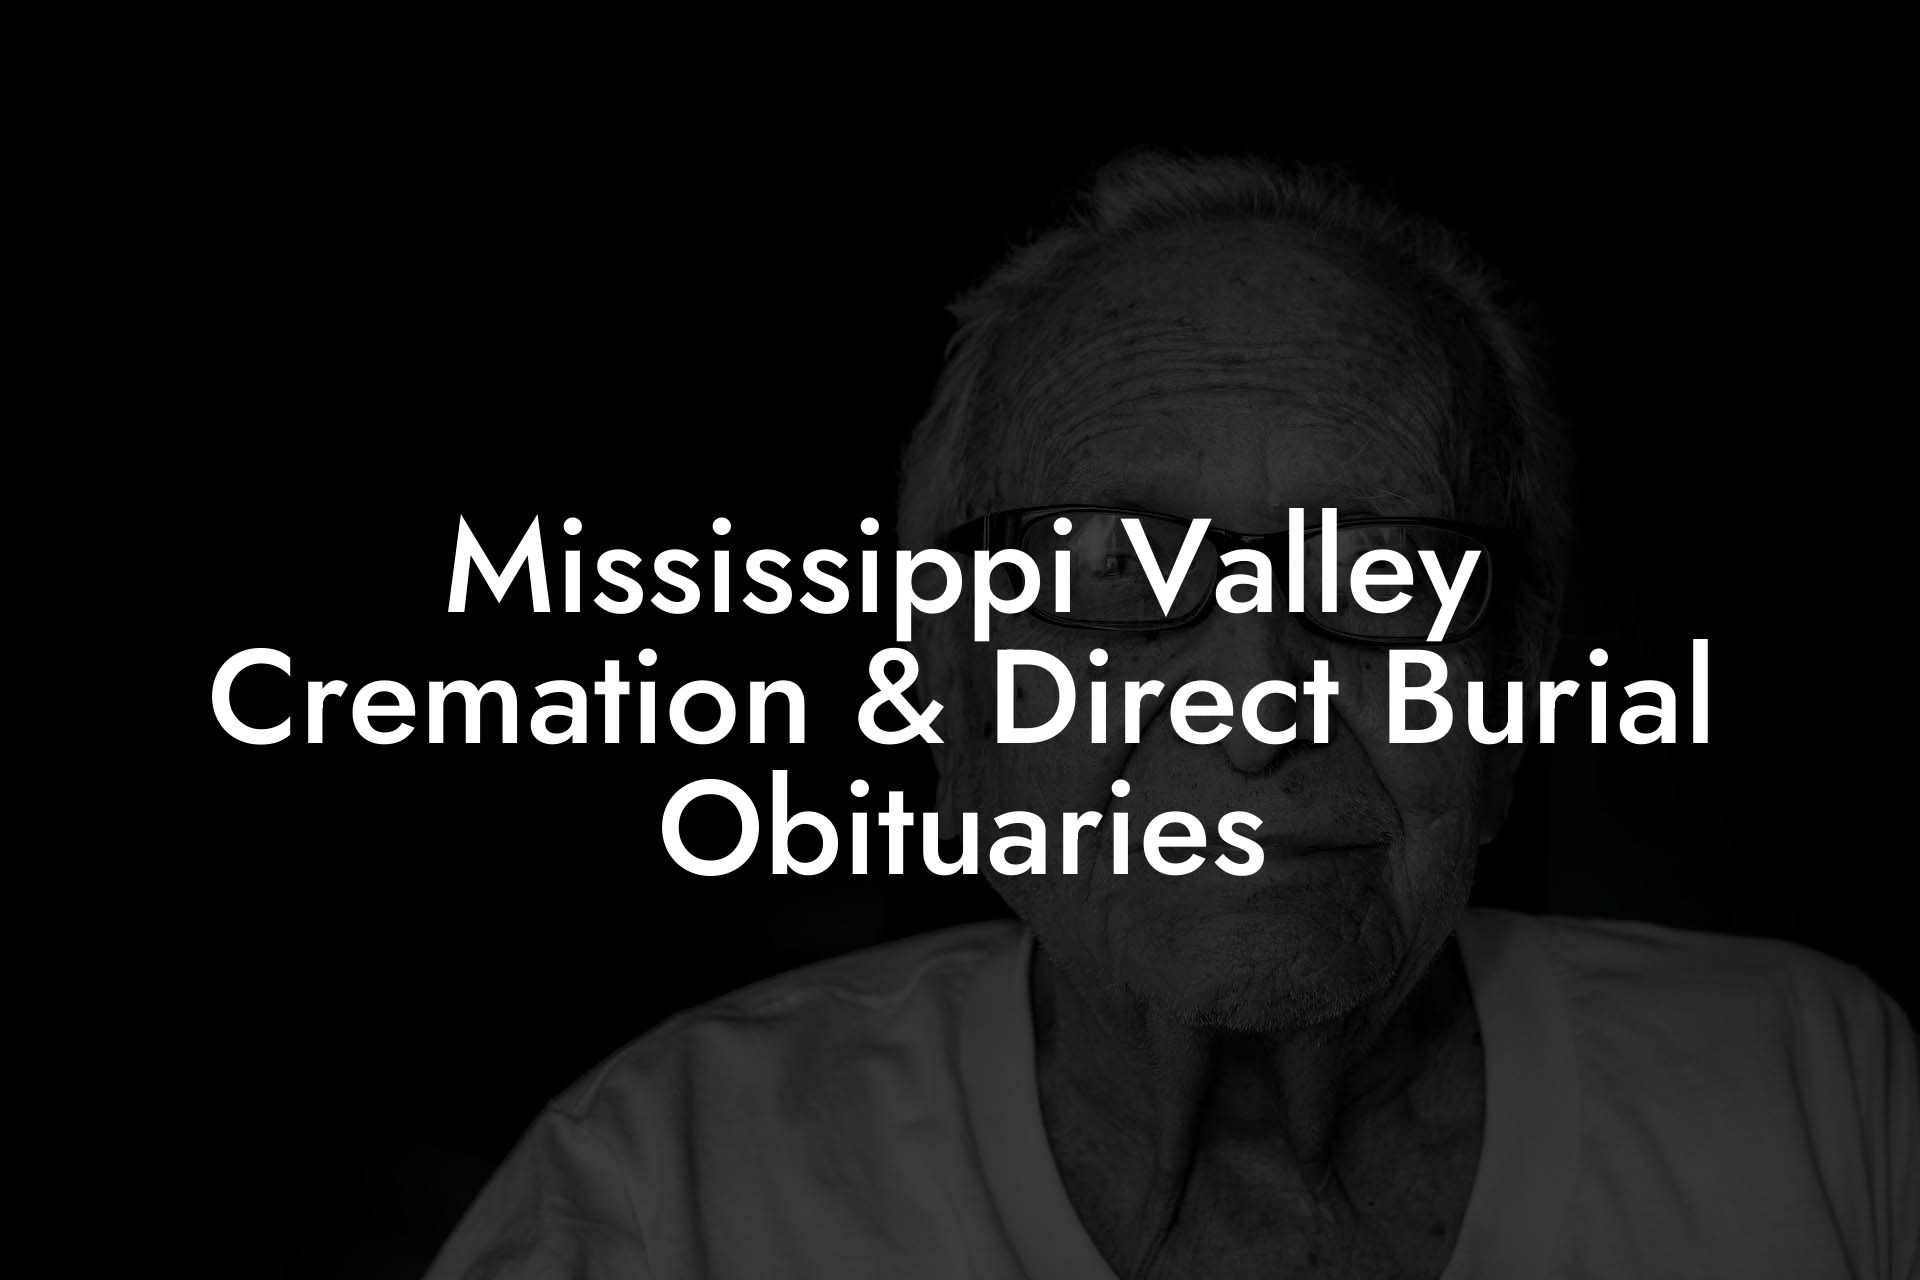 Mississippi Valley Cremation & Direct Burial Obituaries